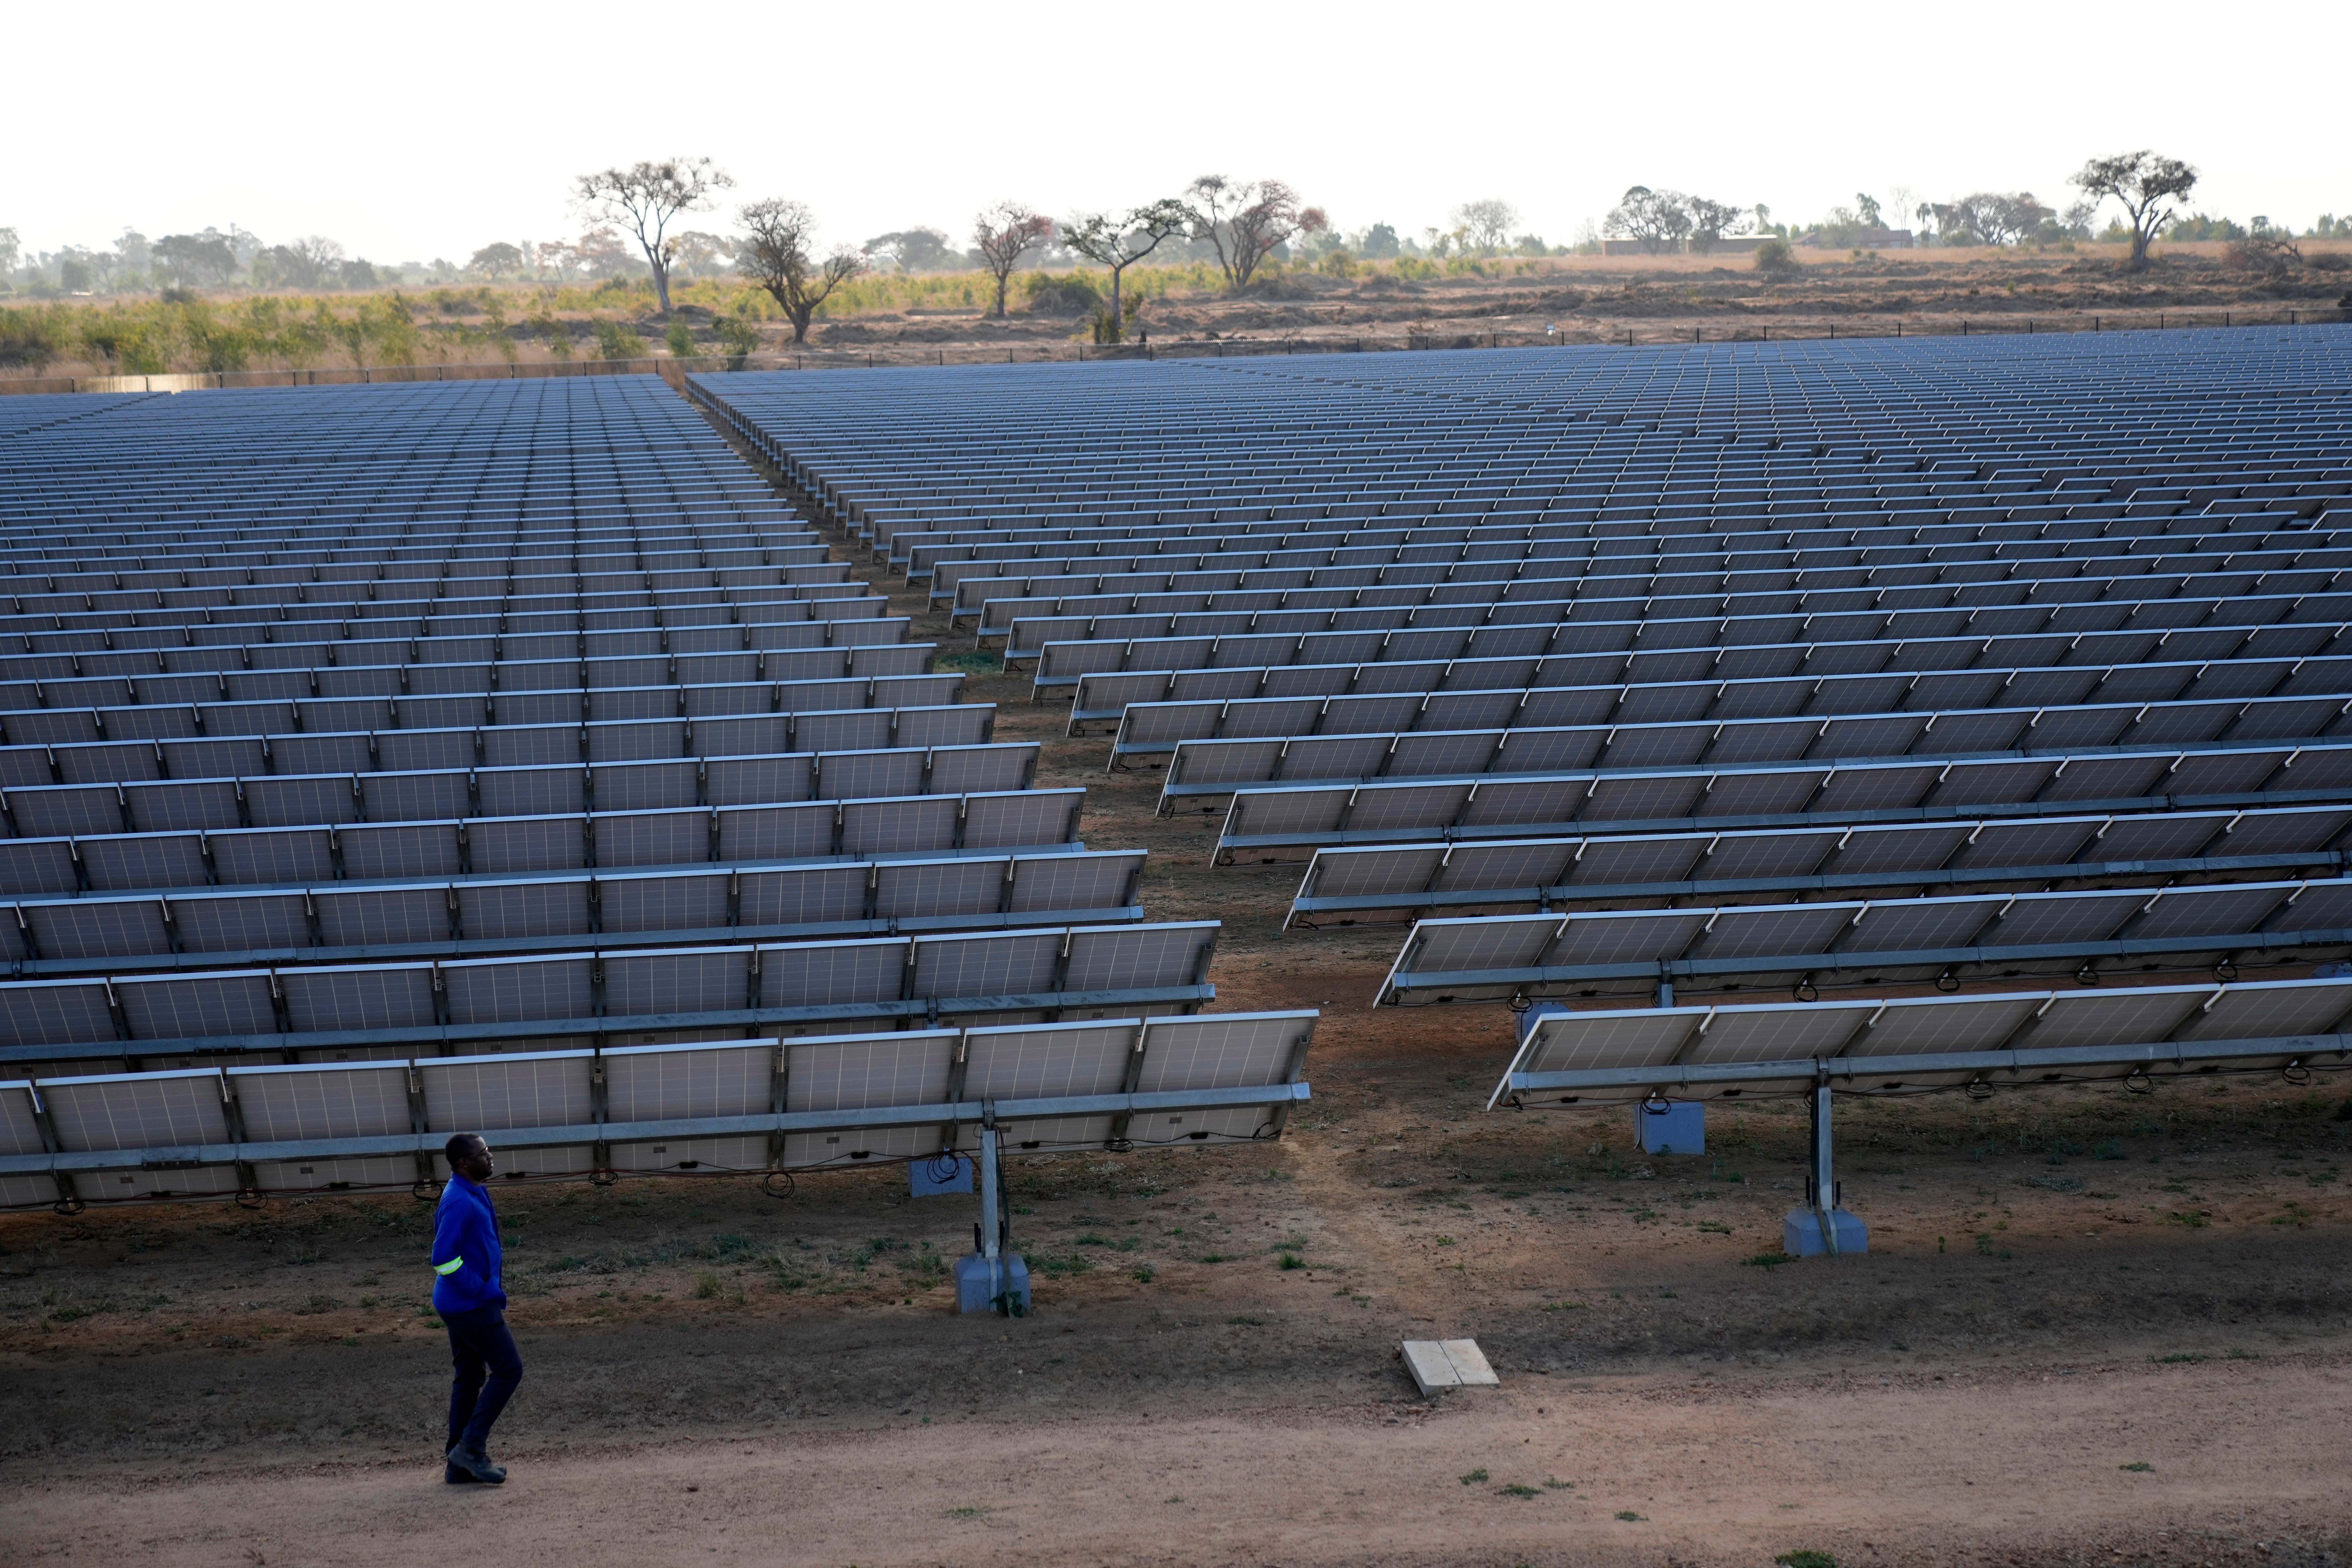 A solar farm in Zimbabwe highlighting the potential from the continent’s vast solar resource